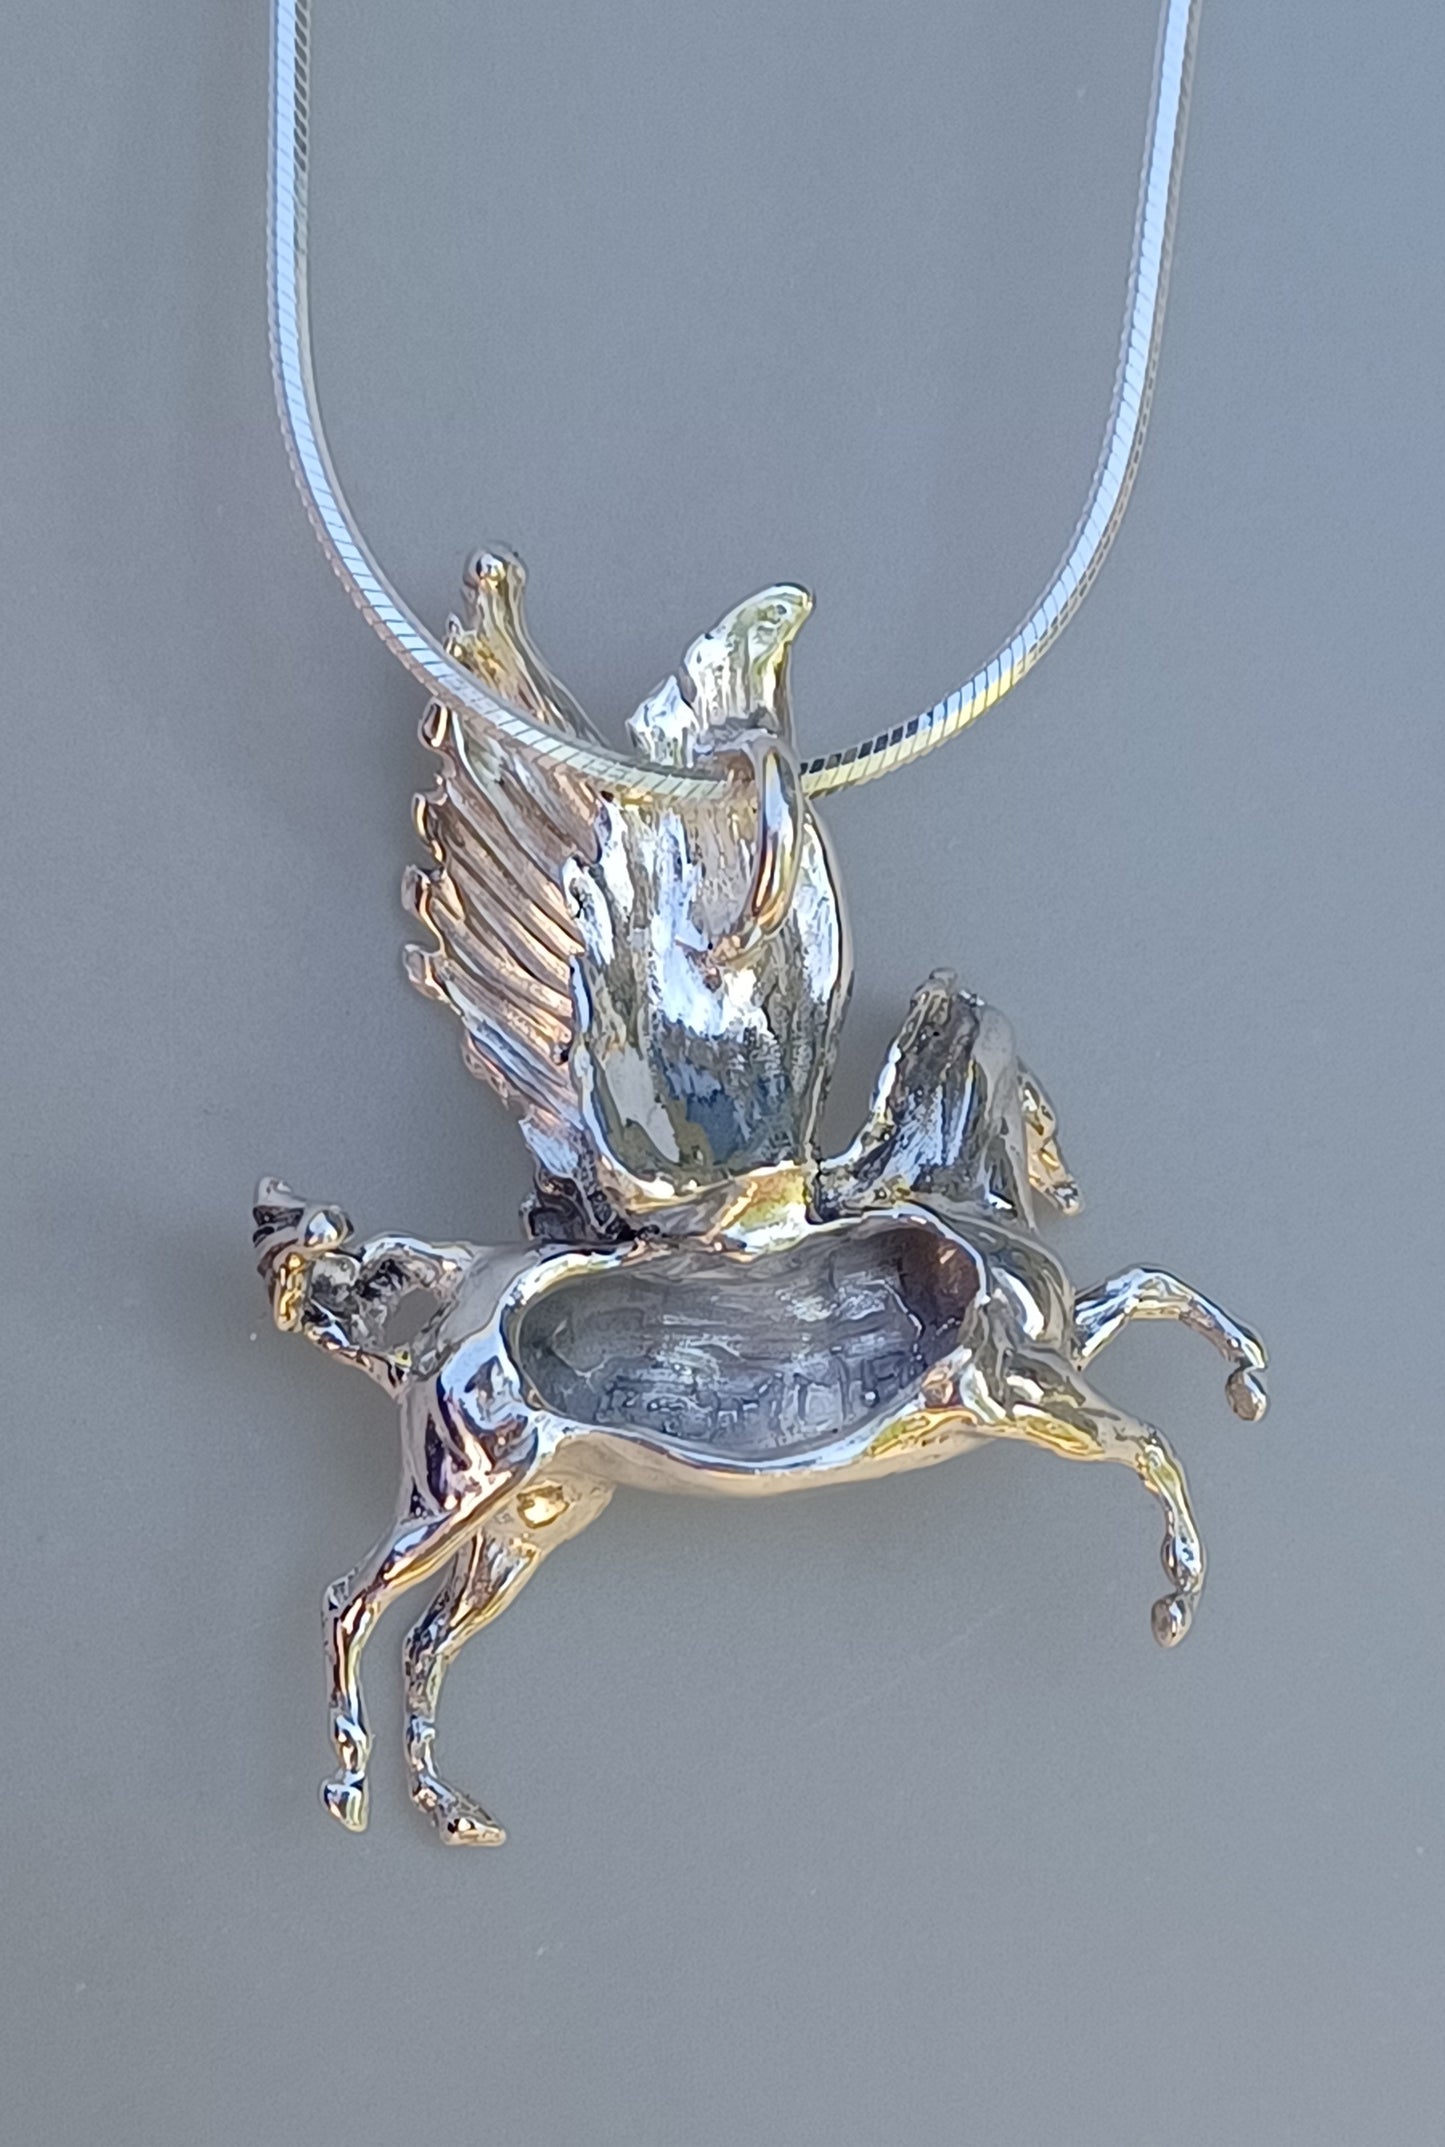 Large Pegasus Pendant three dimensional sterling silver necklace chain included